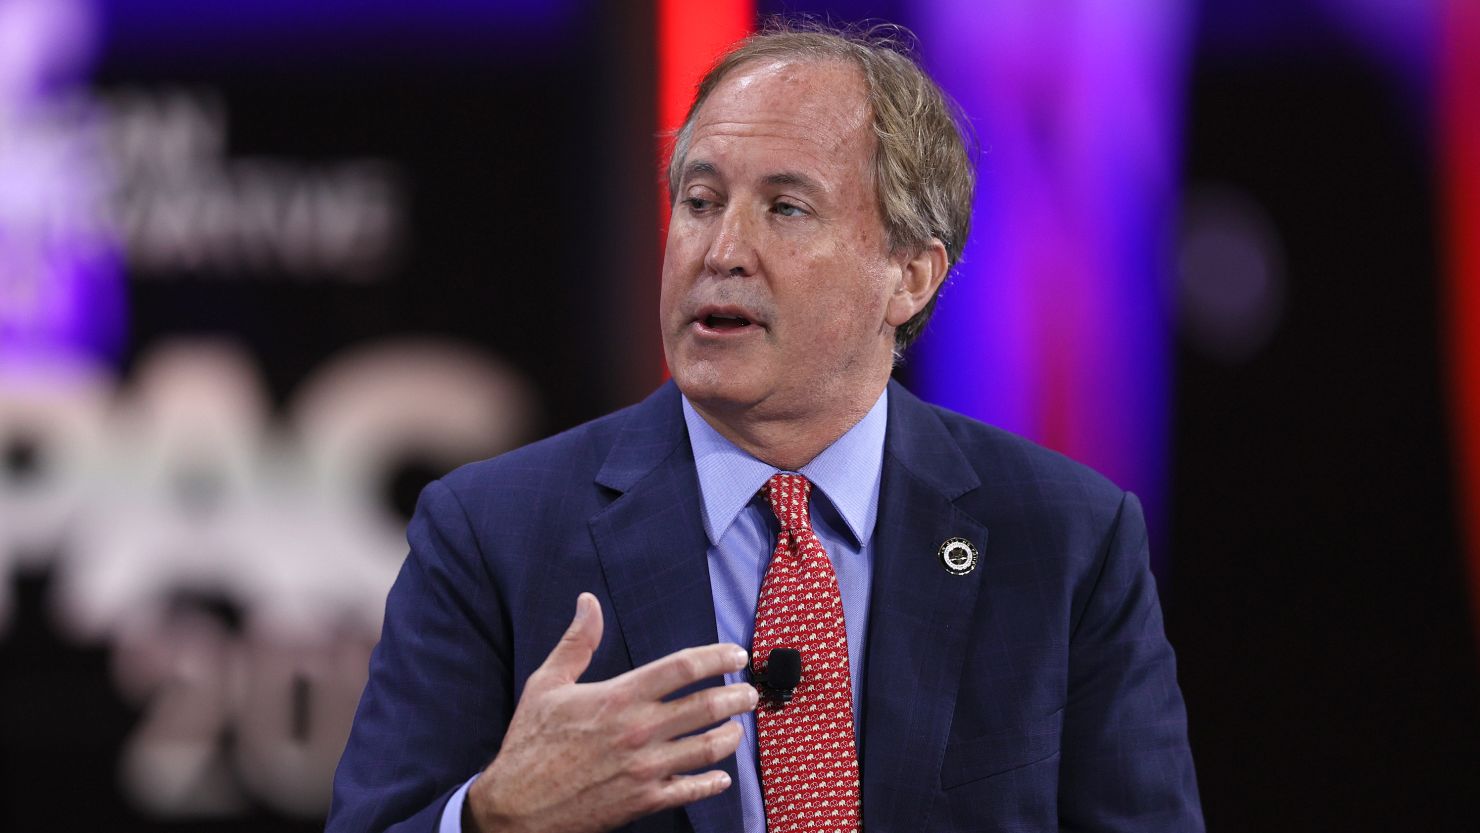 Ken Paxton, Texas' attorney general, speaks during a panel at the Conservative Political Action Conference on February 27, 2021, in Orlando, Florida.